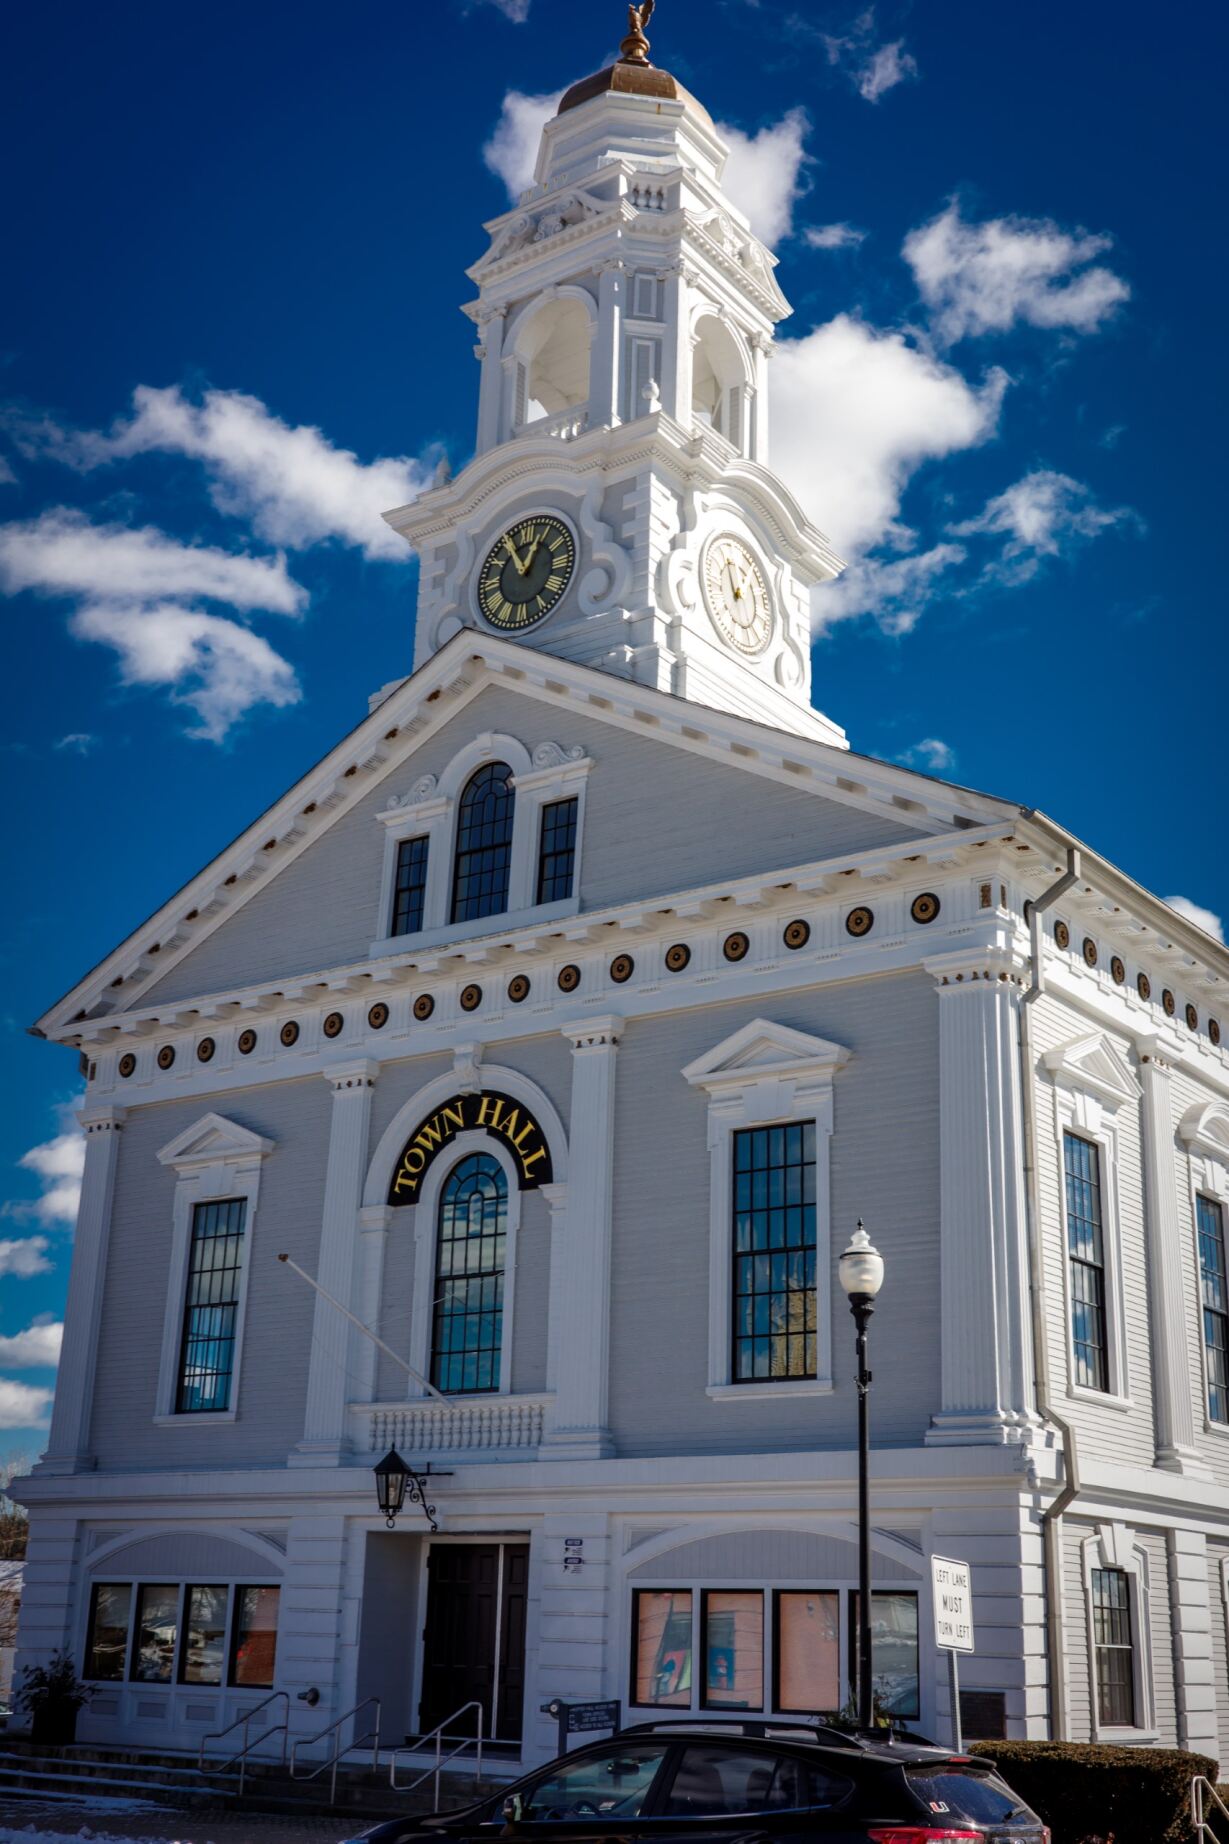 Photo is of the Milford Town Hall. A large building with a clock tower on the top. The sky is blue with a few white clouds above the building.